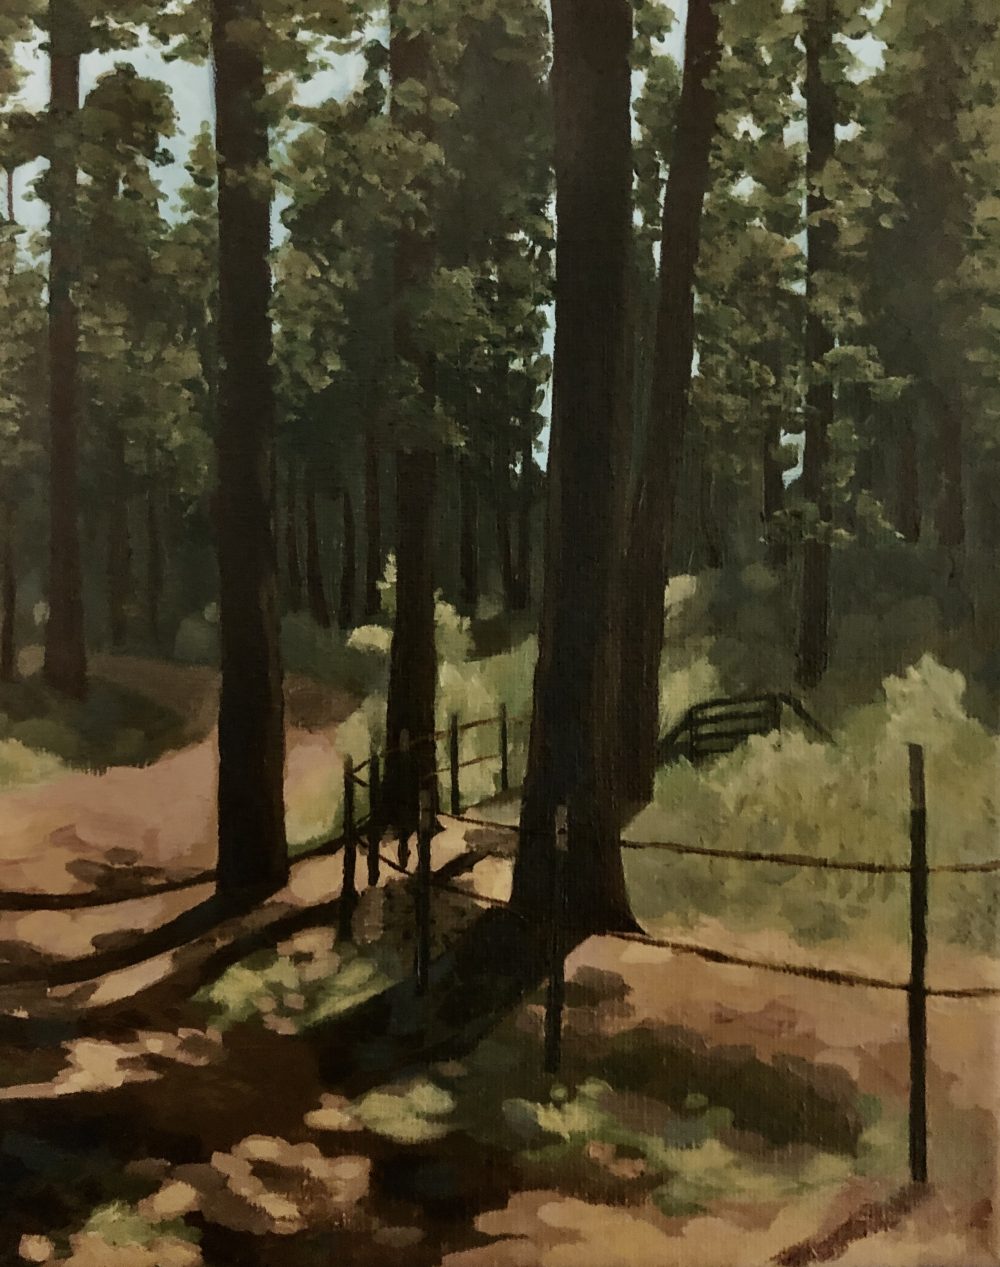 The painting shows a warm forest scene on a summer's day. There is a dirt path that starts in the foreground and swerves right before disappearing off to the left in the background. There is a shabby wire fence that follows the dirt path. There are a few dark figures of tall sparse trees in the foreground, and many of the same trees in the background. From the top right, sunlight cascades through the trees in the foreground which create beautiful long shadows in the bottom left foreground.